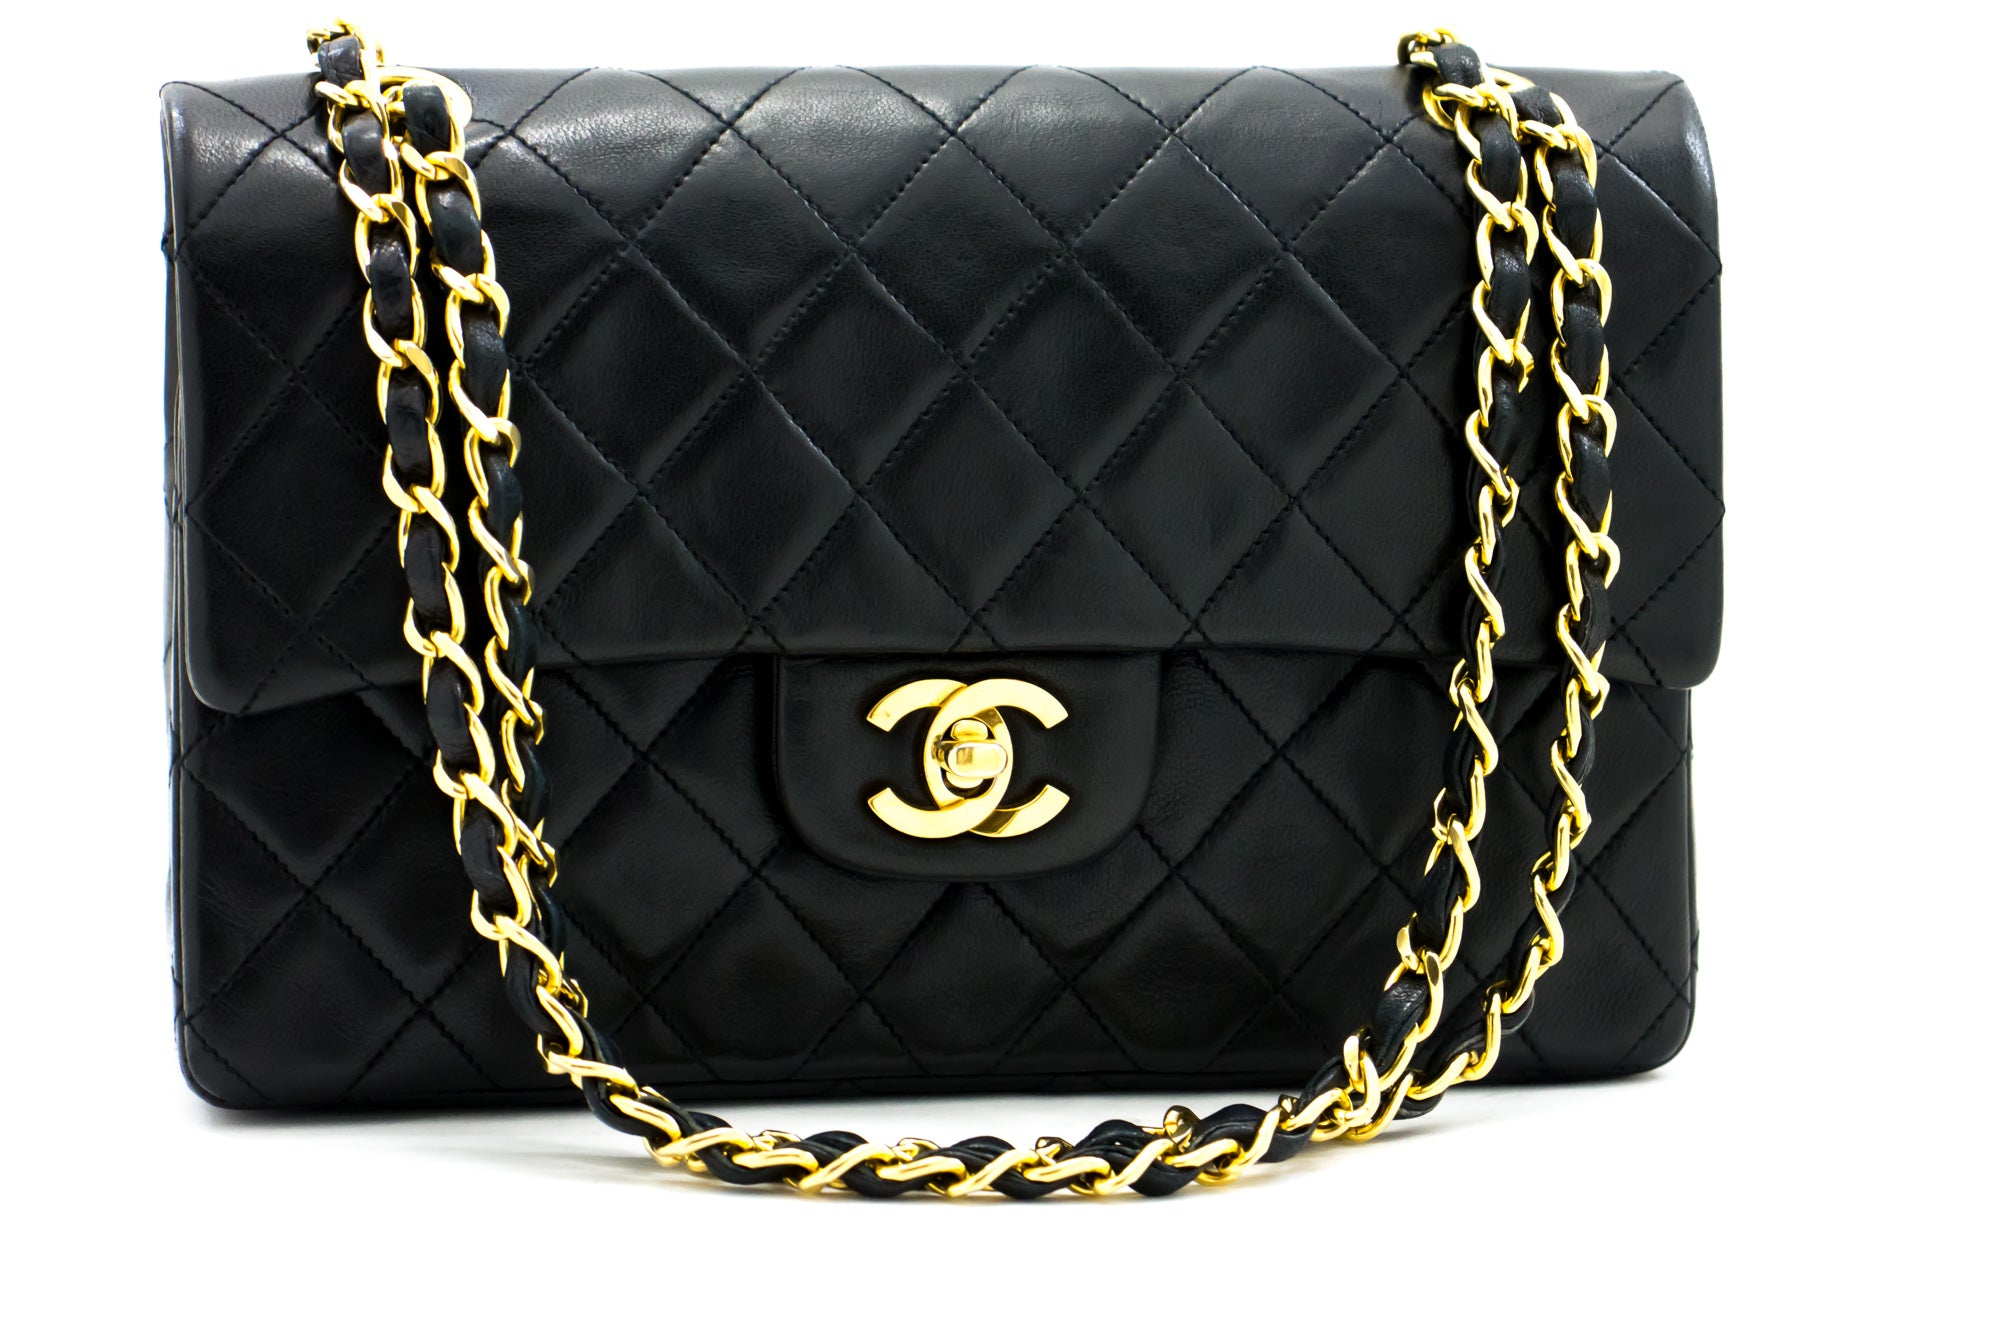 CHANEL Double Flap Small Caviar Leather Shoulder Bag Black-US